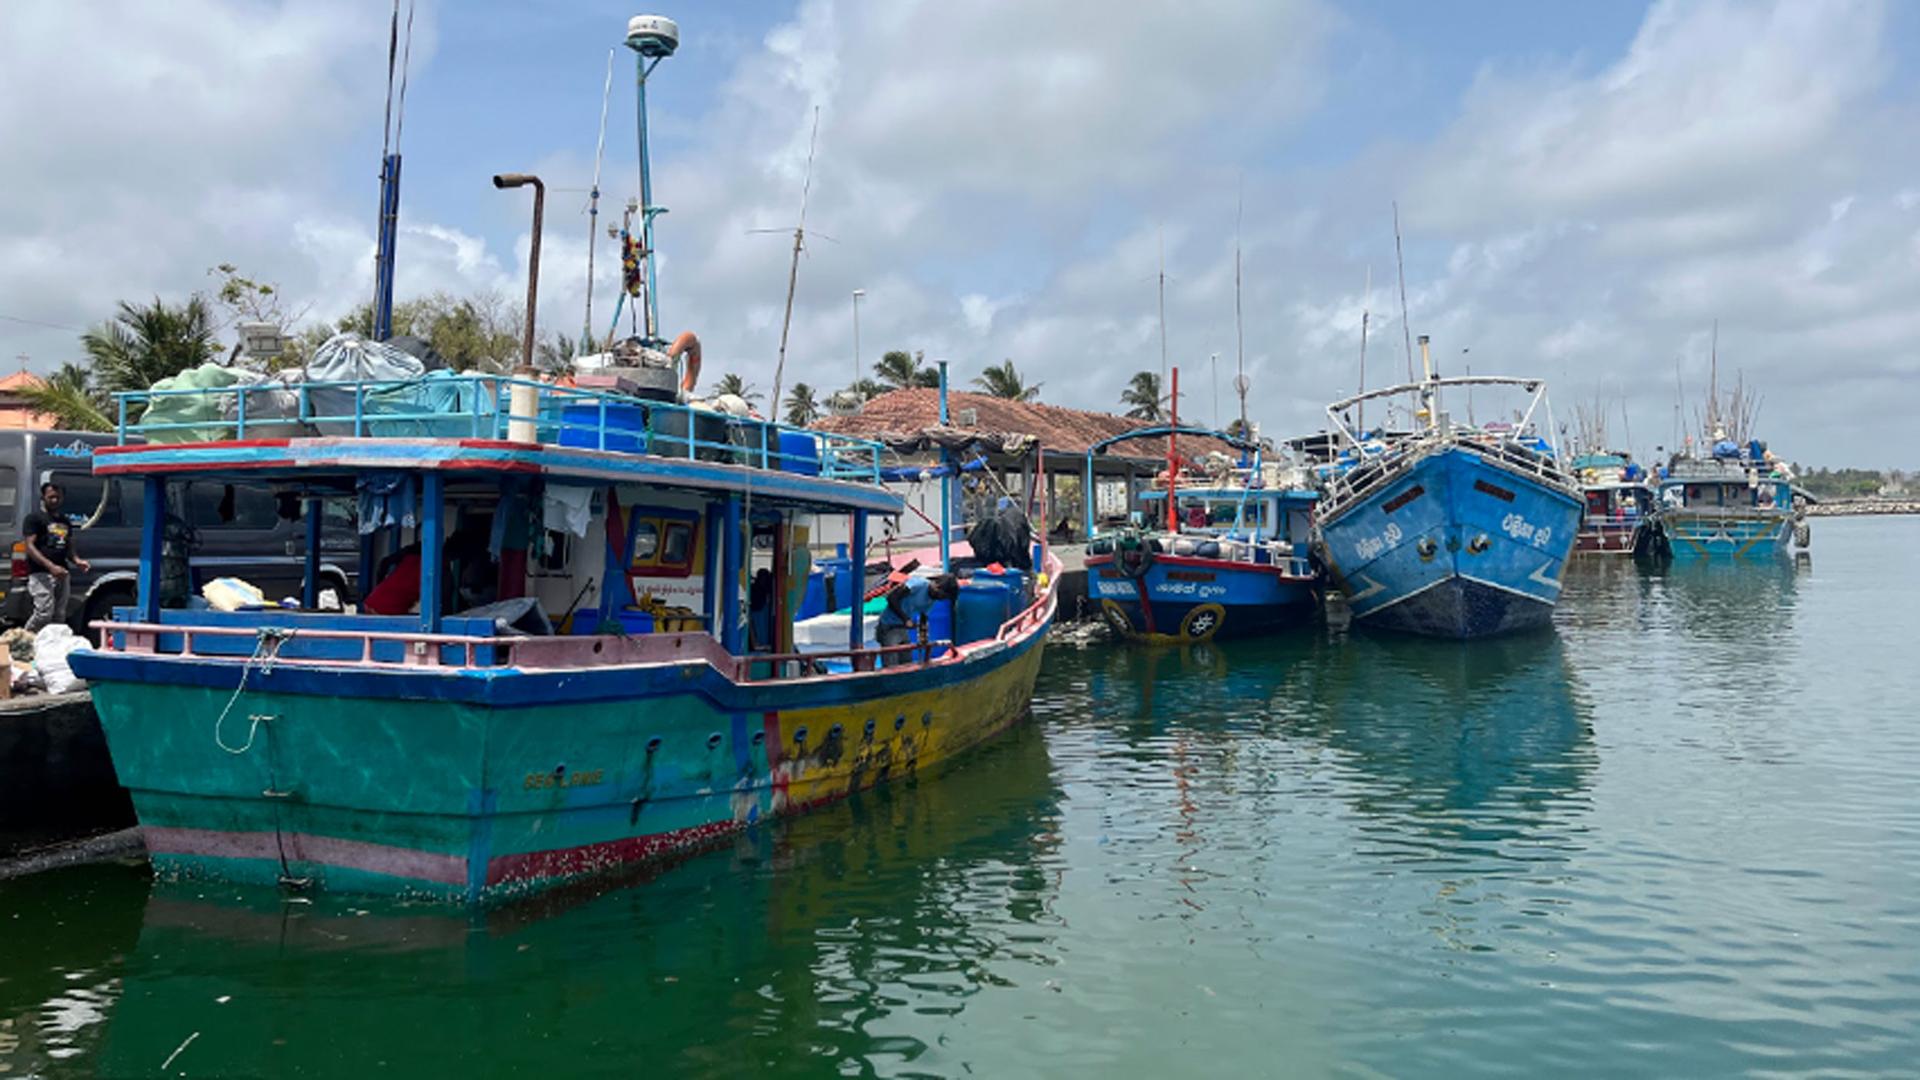 Double the usual number of fishing boats are seen at the Dikkowita Fisheries Harbor, a main harbor in the Colombo area of Sri Lanka